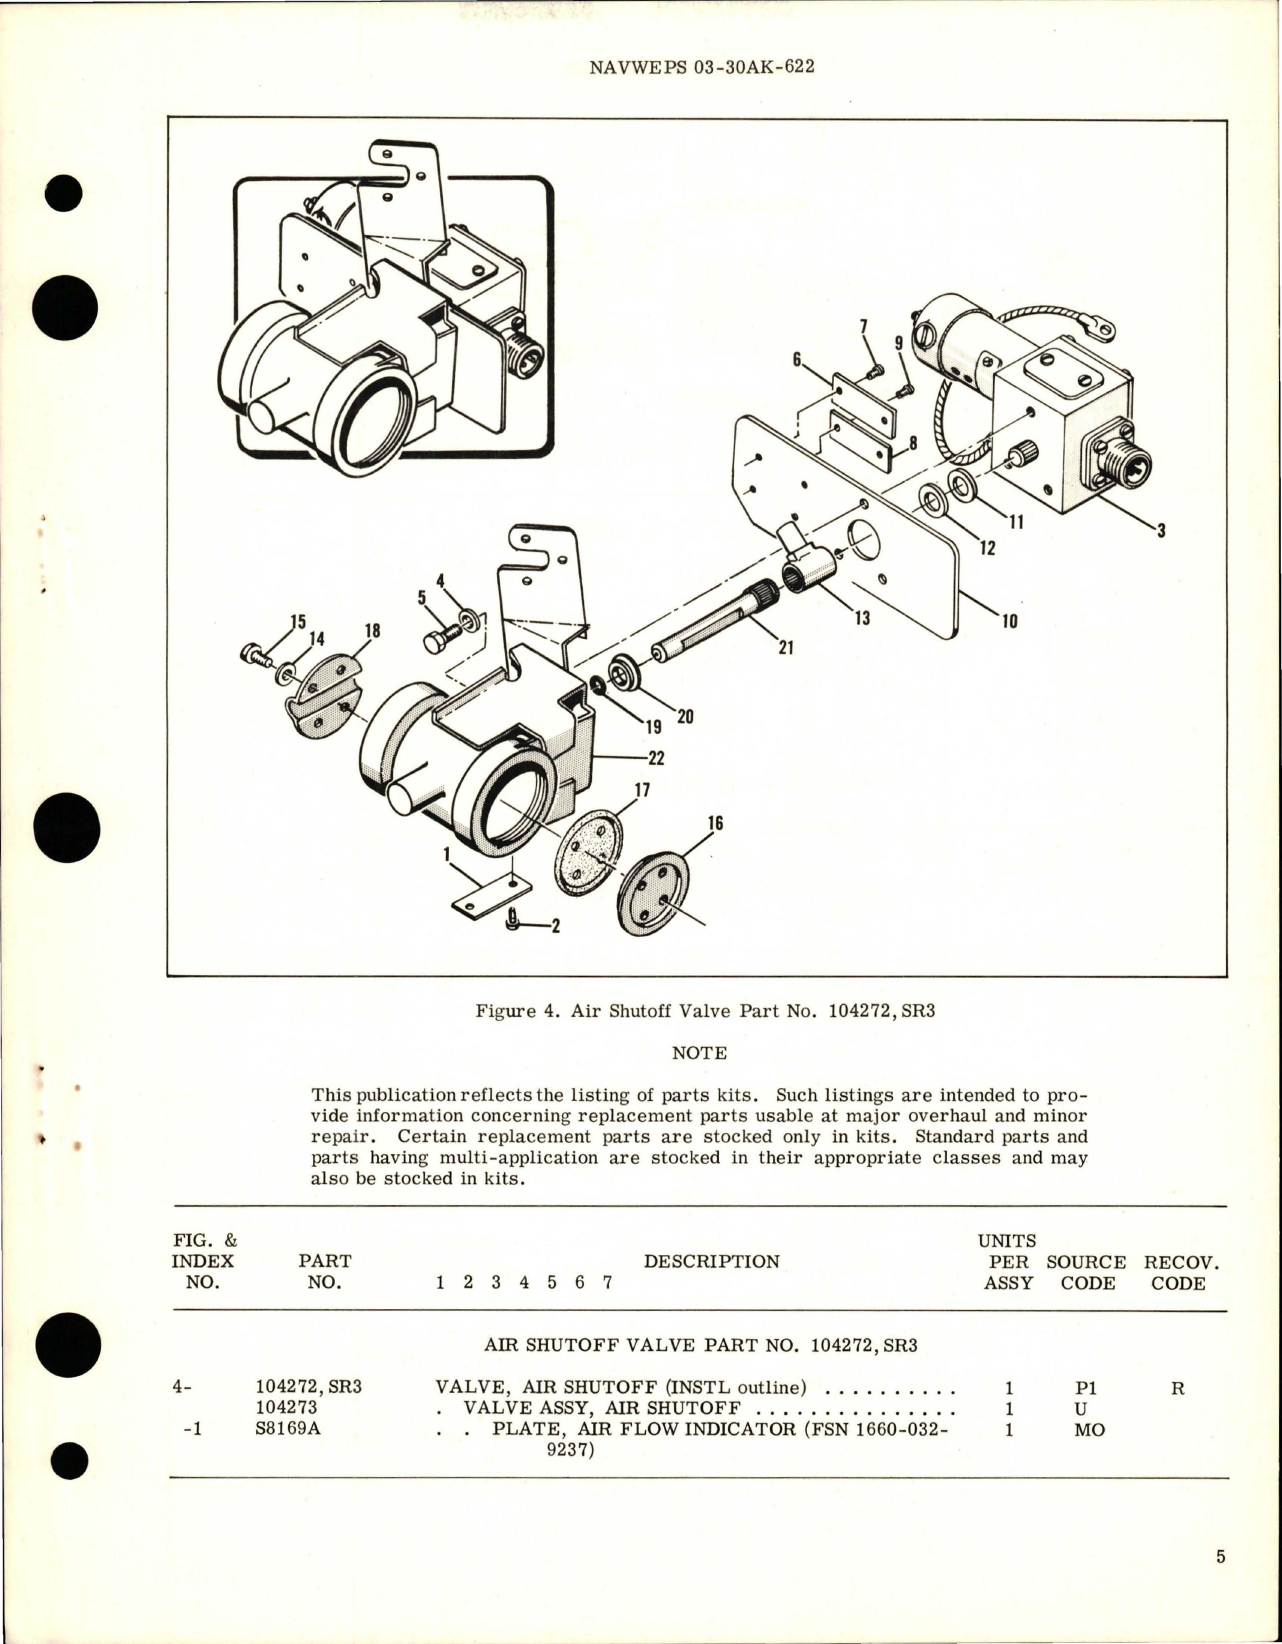 Sample page 5 from AirCorps Library document: Overhaul Instructions with Parts Breakdown for Air Shutoff Valve - Part 104272, SR2